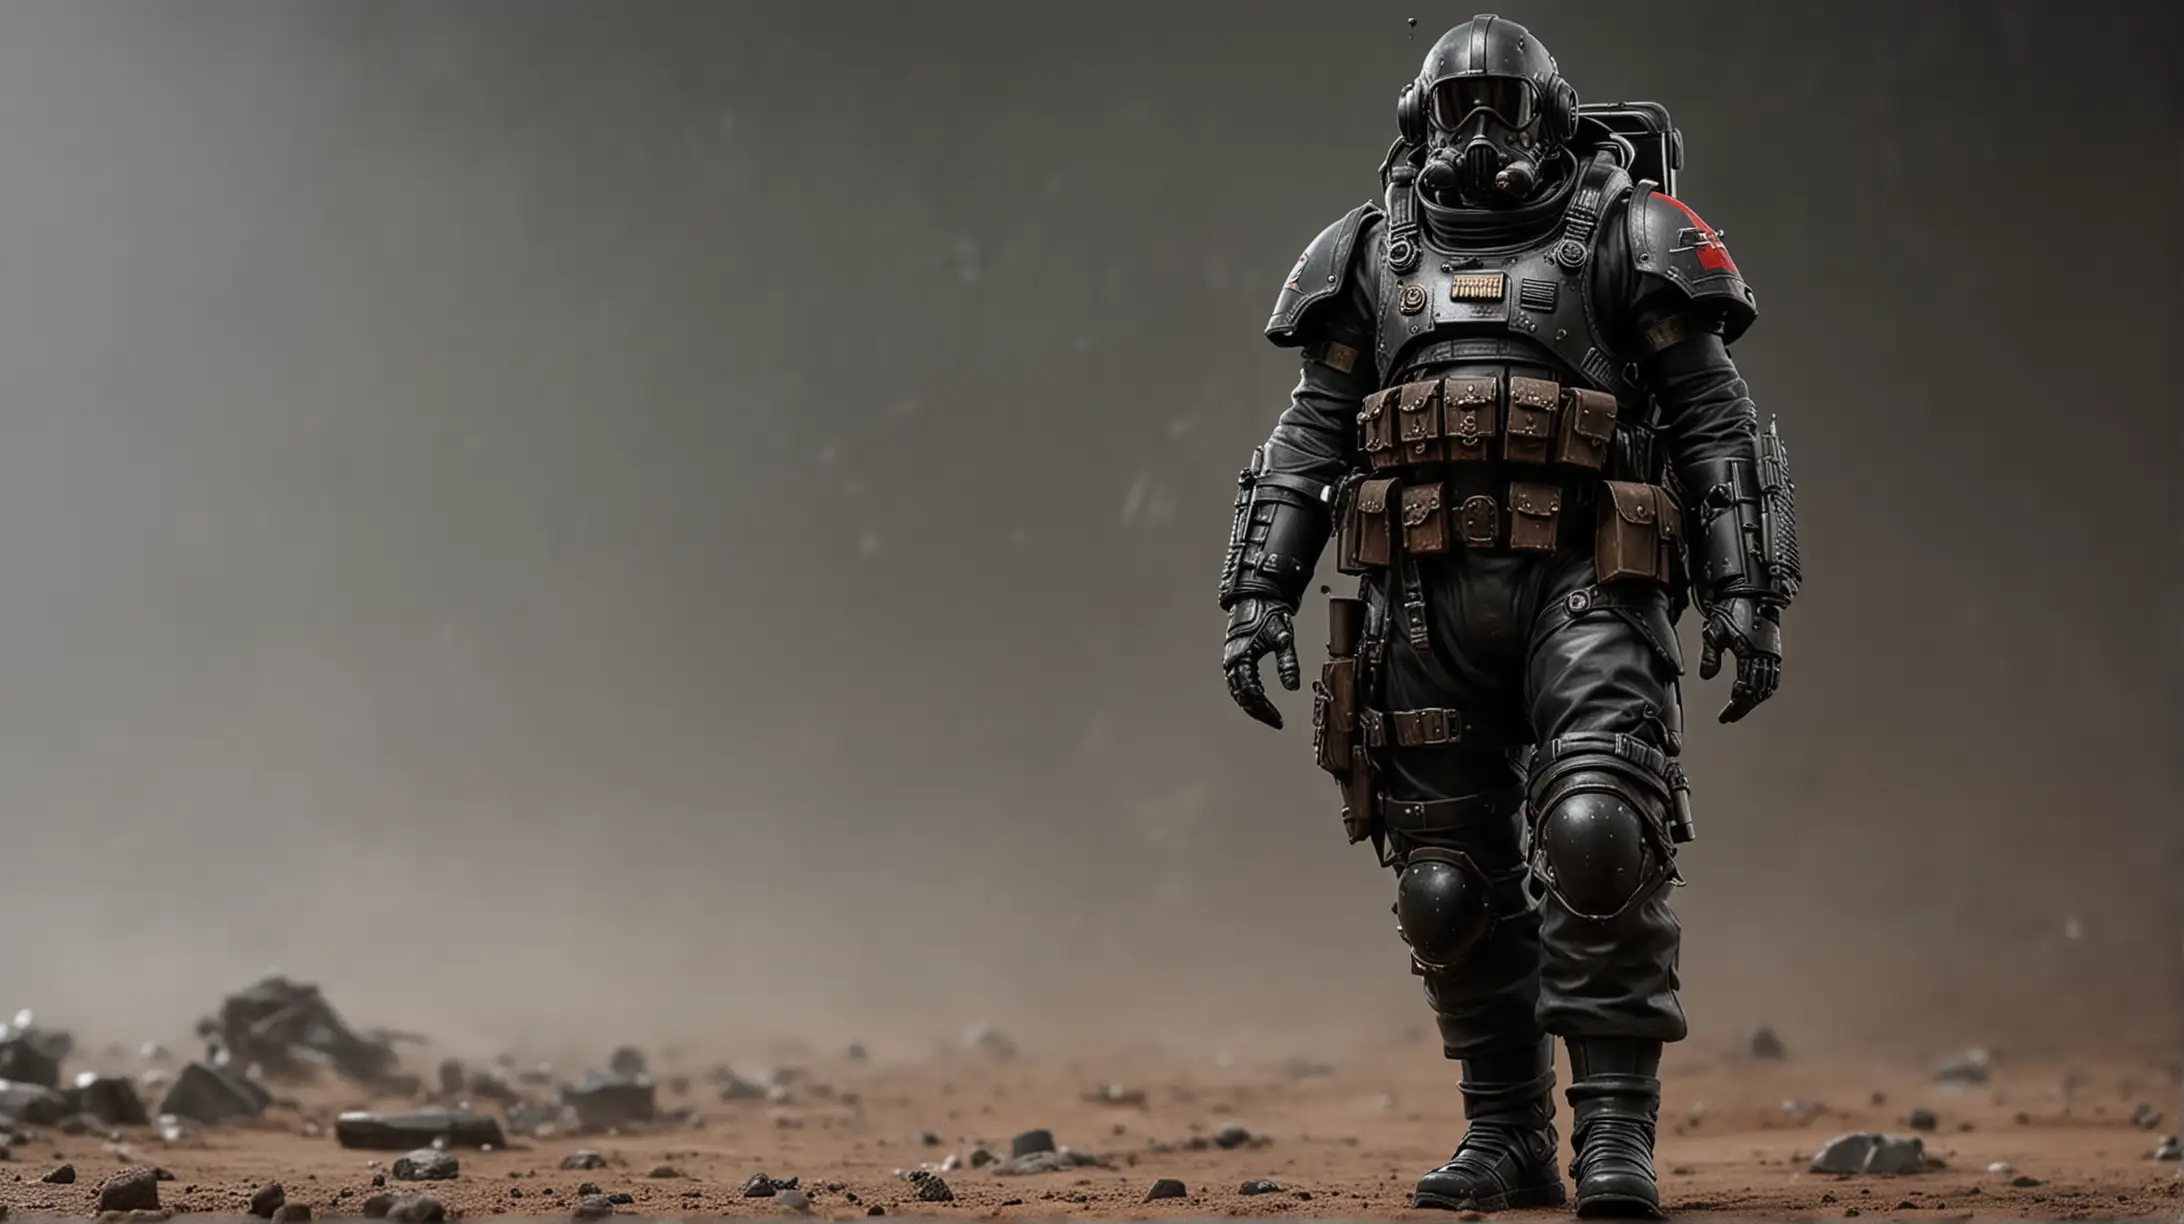 A warhammer 40k imperial guard soldier in a closed environment suit. Air tank backpack. Black, tight. Chemical protection suit.